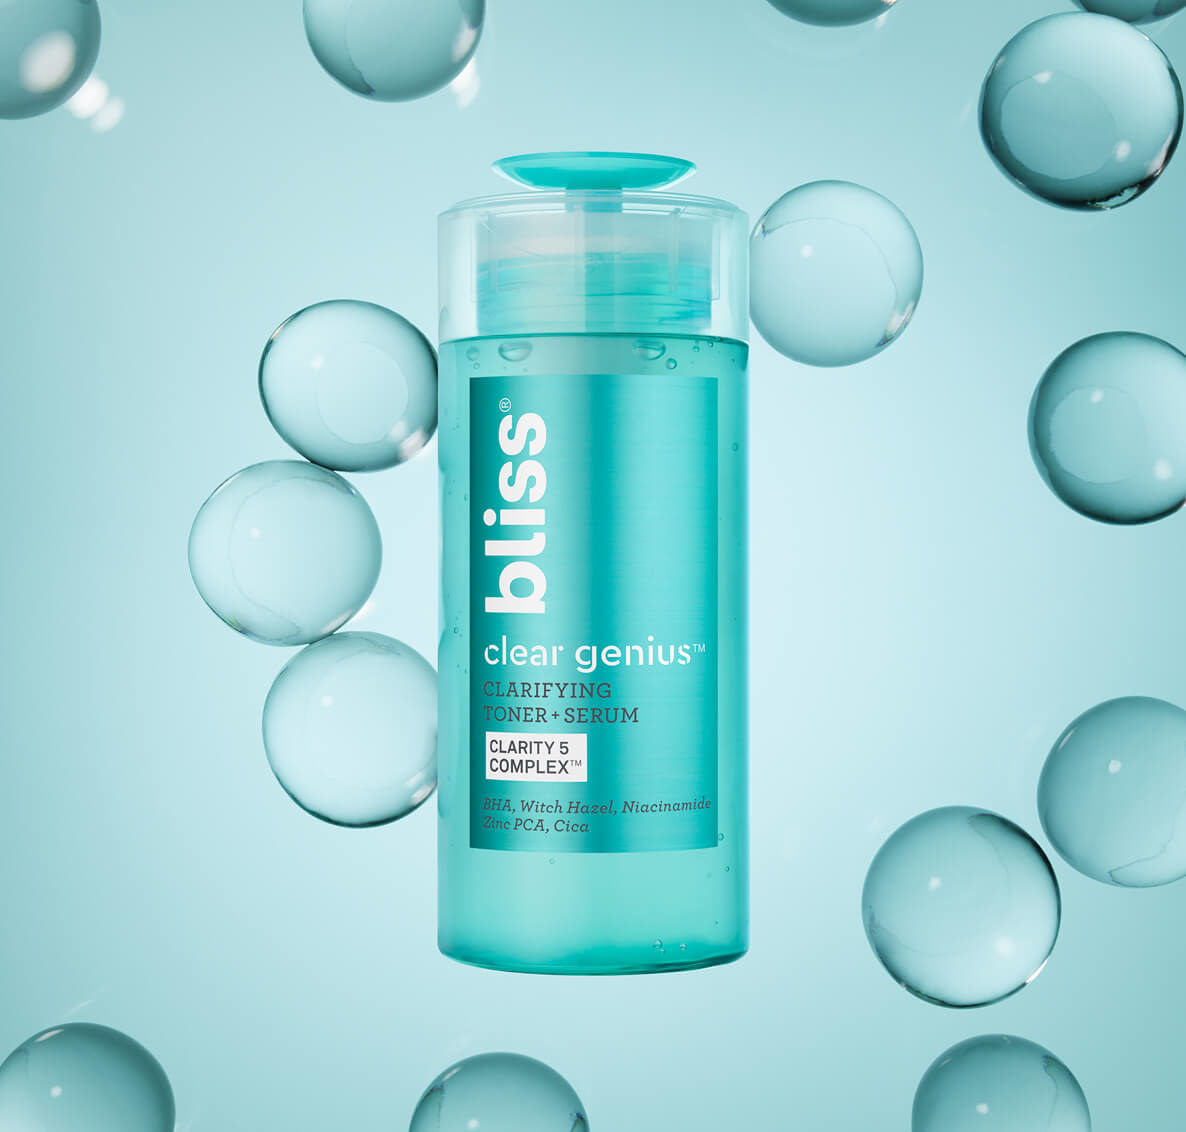 A bottle of toner and serum on a blue bubble background